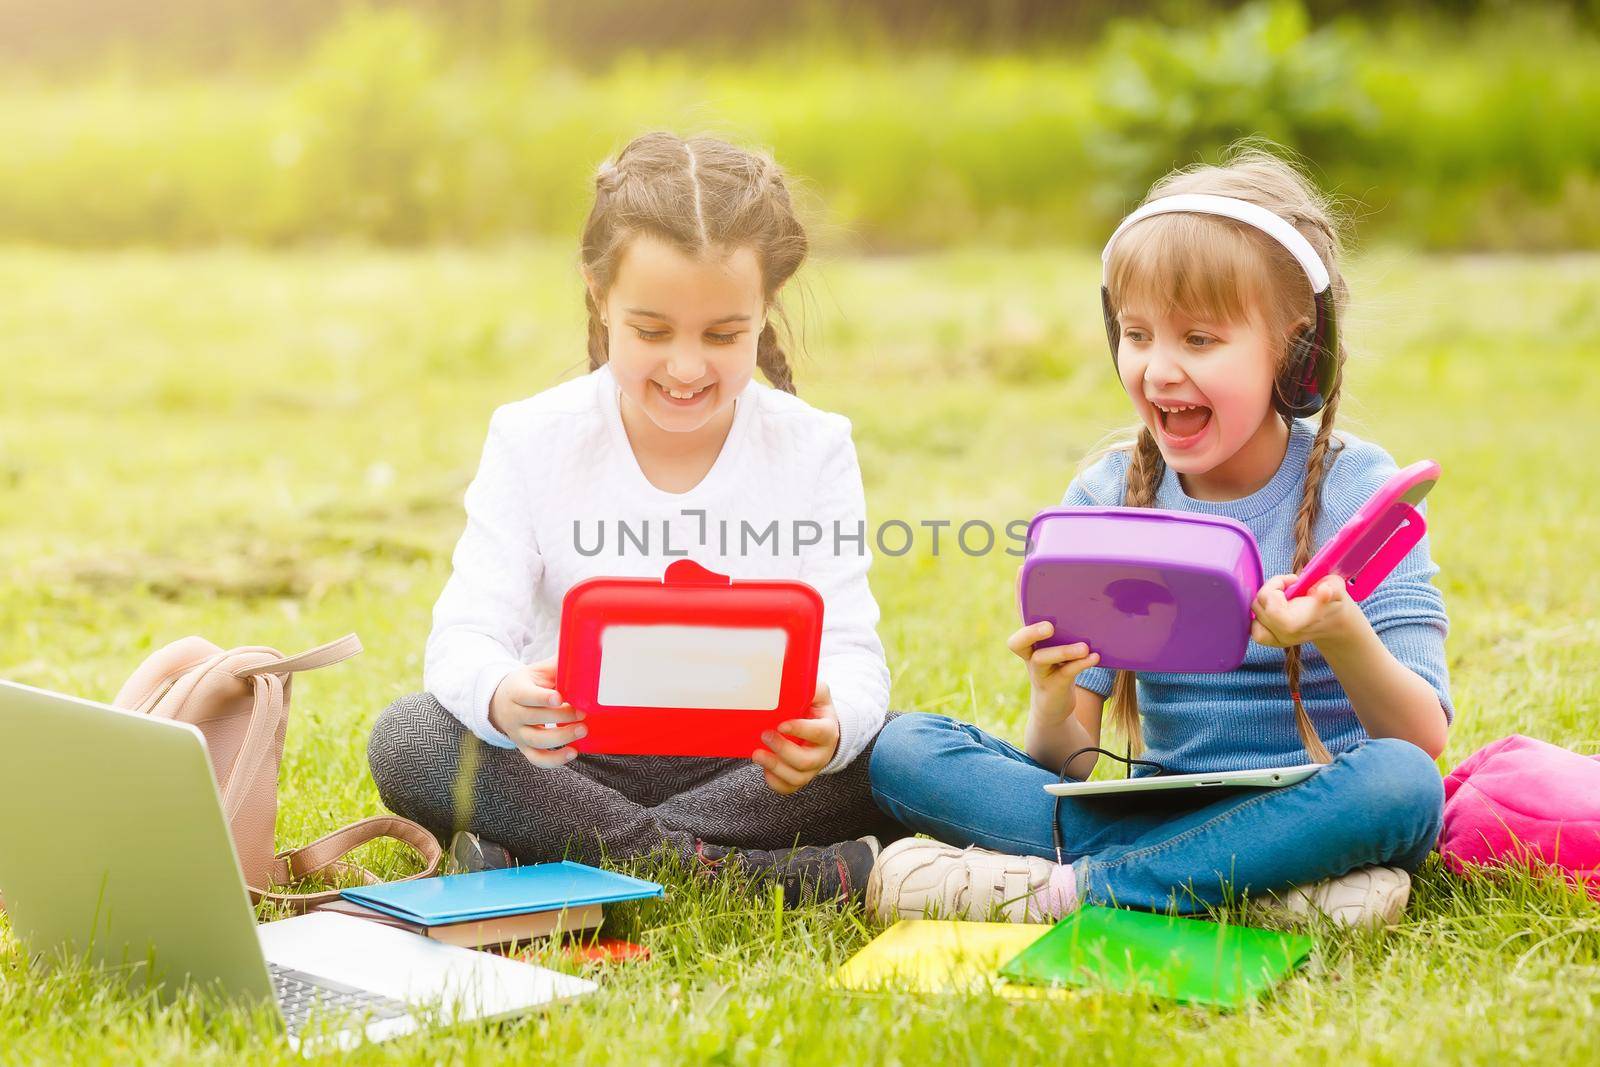 kids on the picnic in school grass yard are coming eat lunch in box. parent take care of childcare.